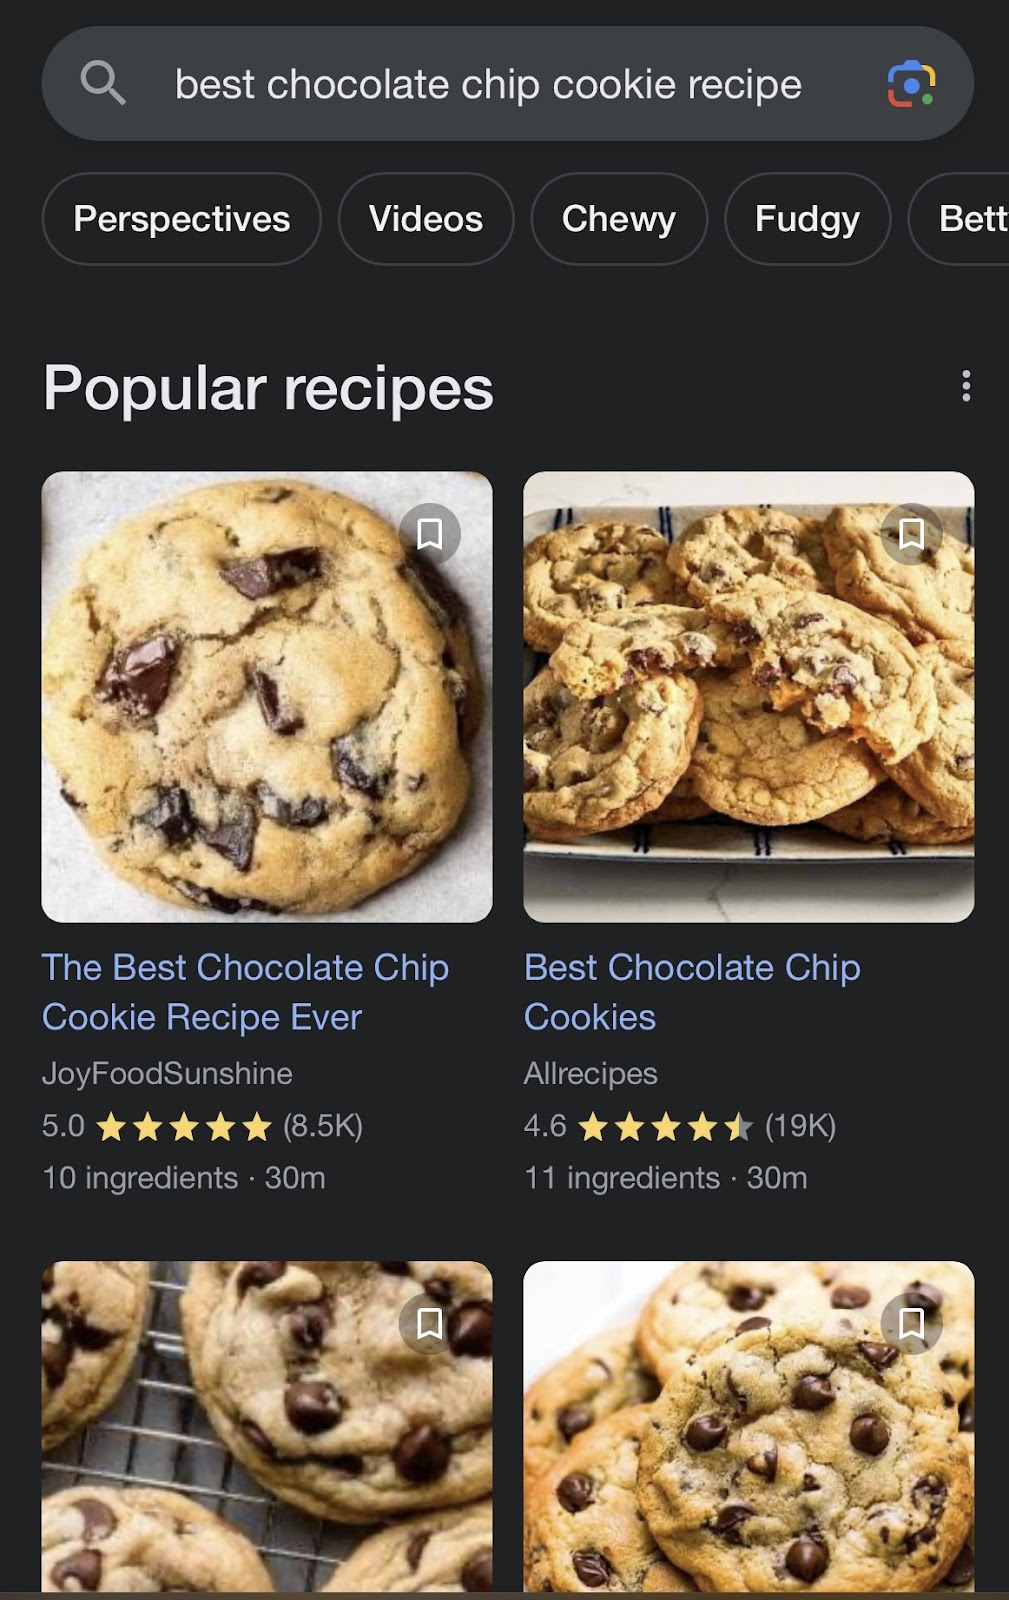 Standard Google mobile search results for chocolate chip cookie recipes